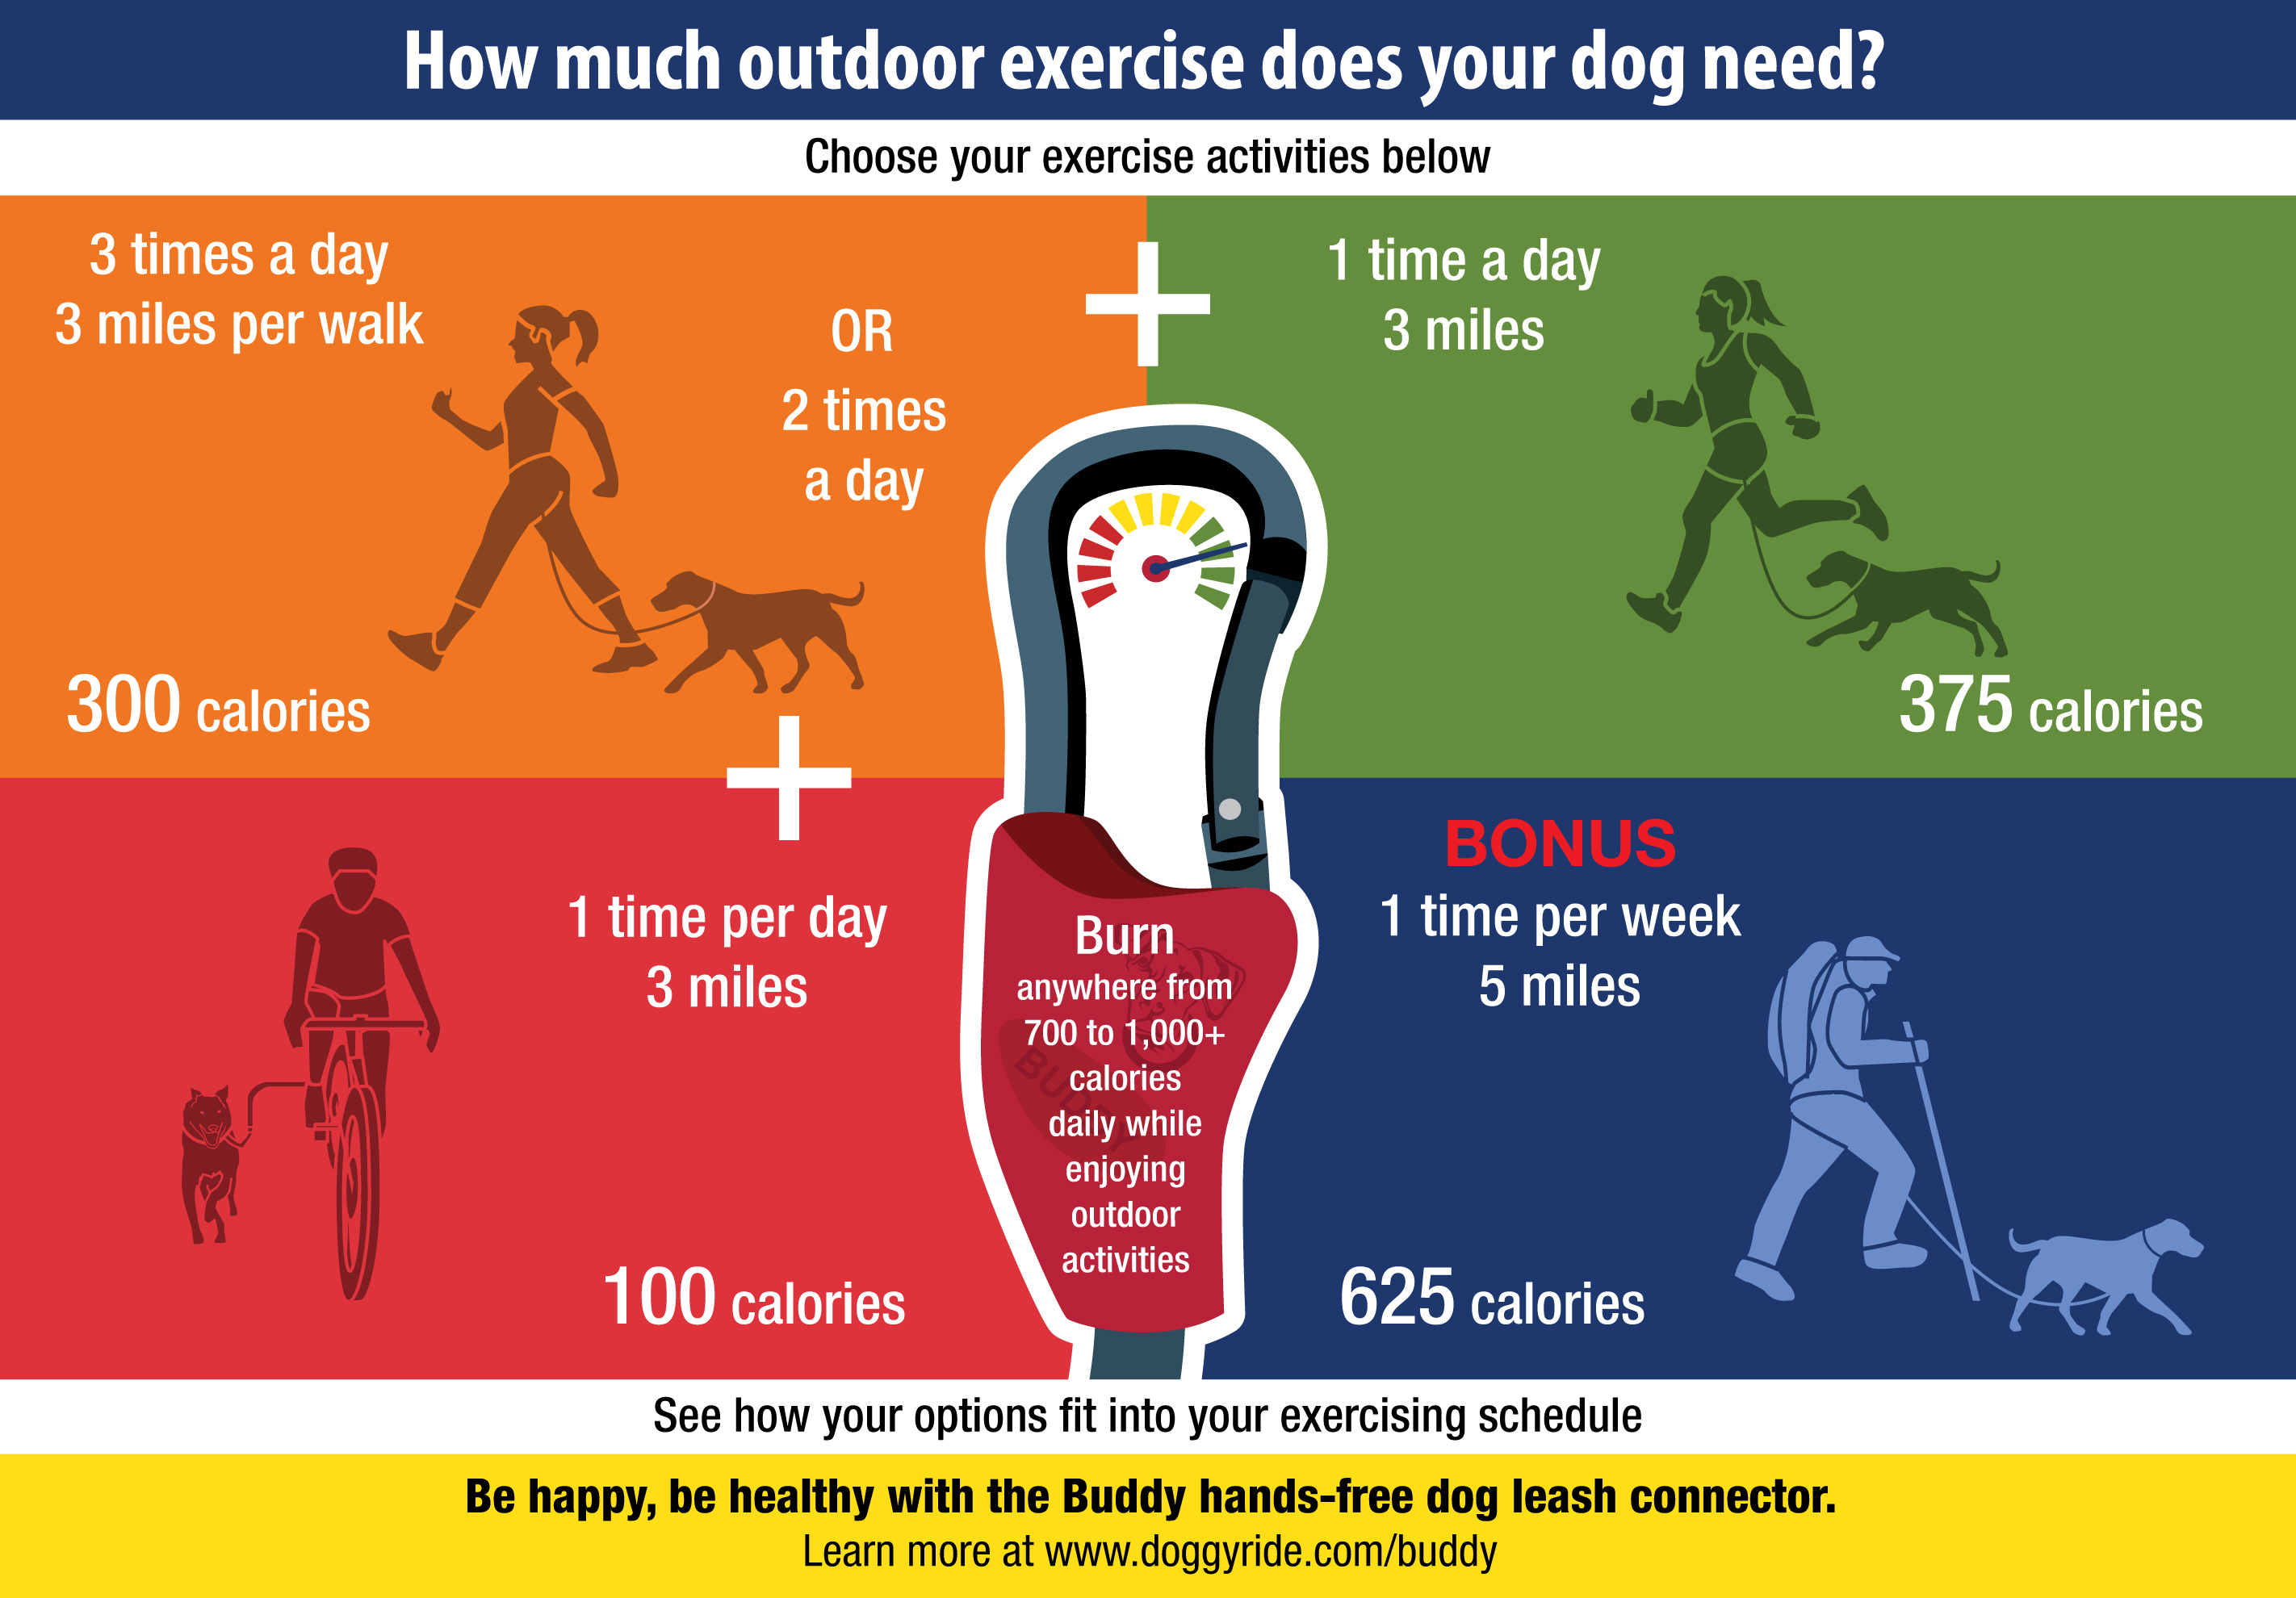 https://i.visual.ly/images/how-much-outdoor-exercise-does-your-dog-need_52950a3d4098c.jpg